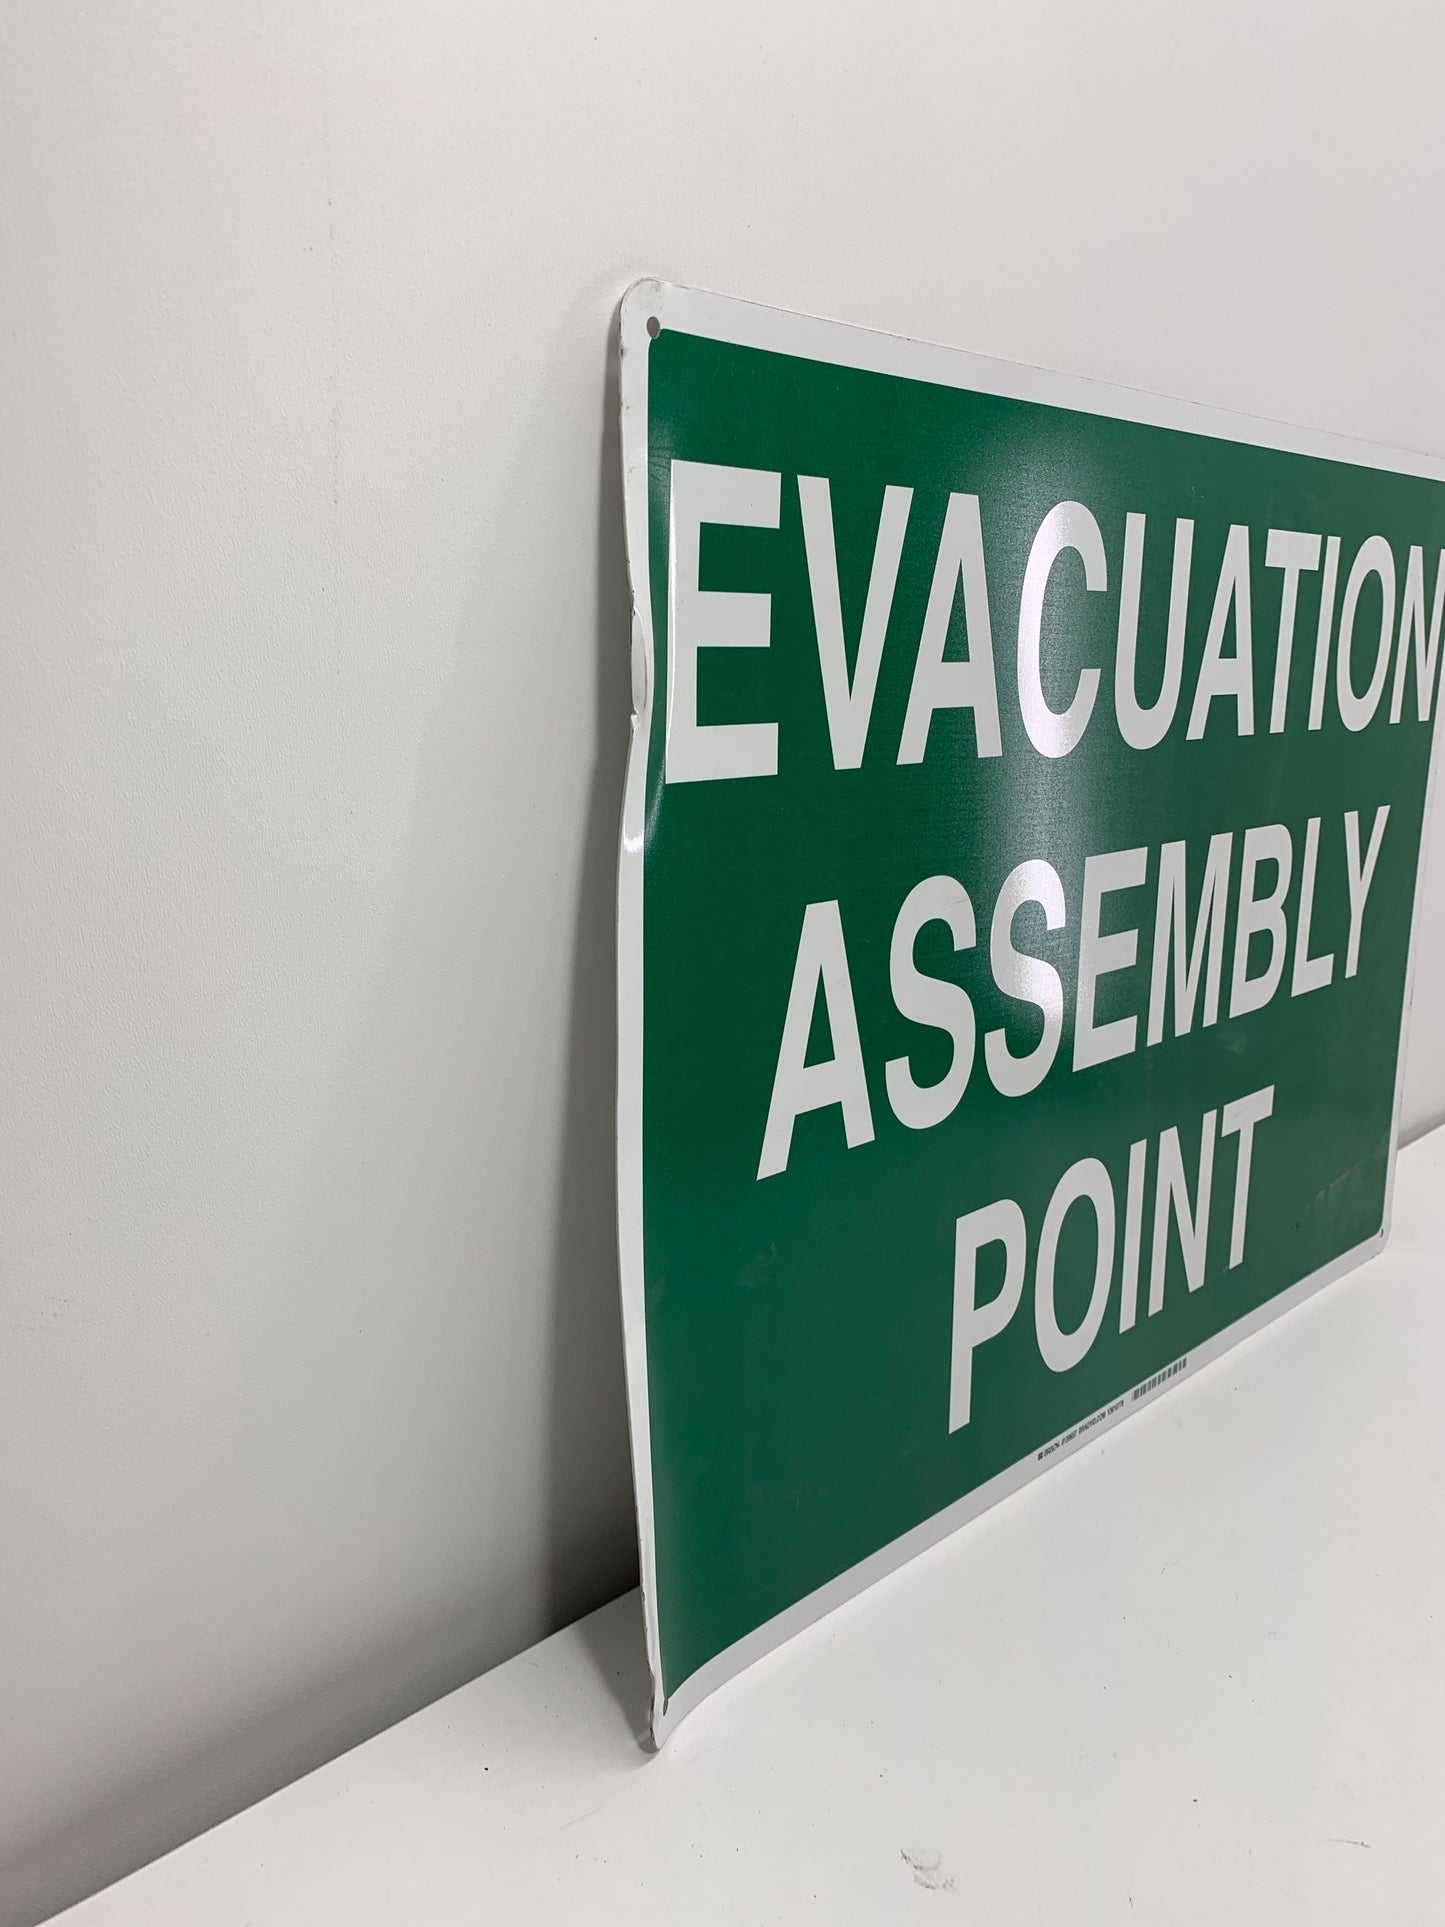 Brady 139657 Aluminum "Evacuation Assembly Point" Sign, Text, 18" H x 24" W, White on Green